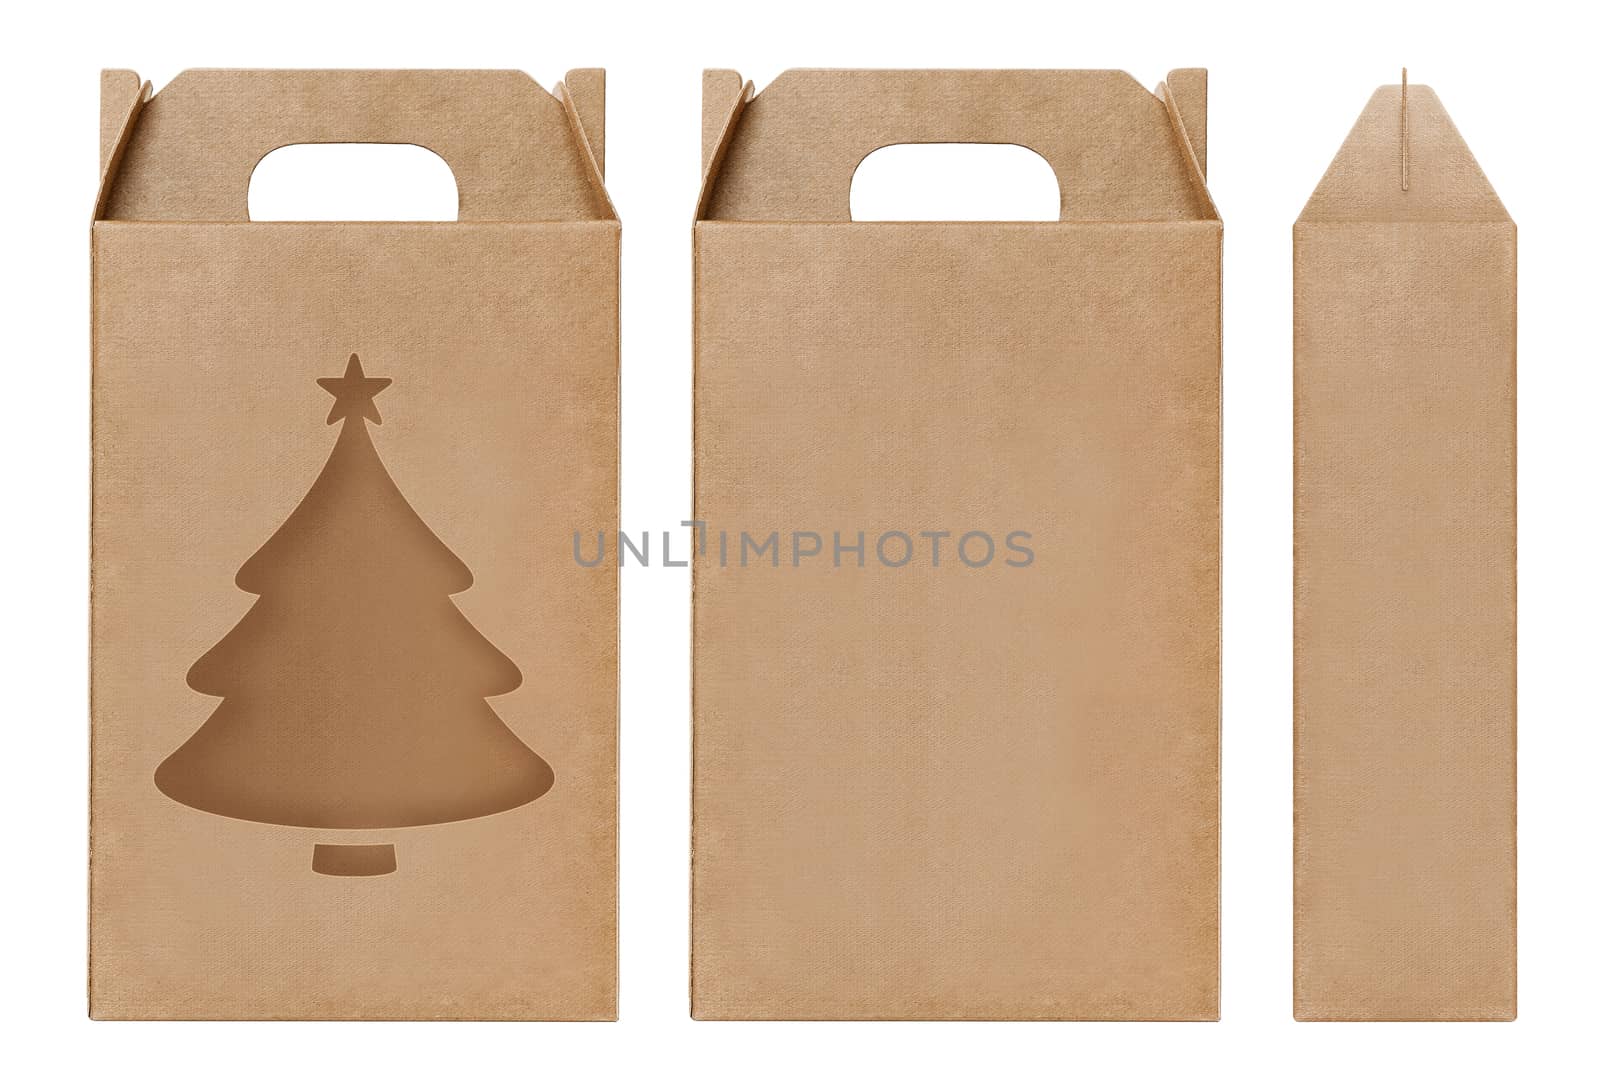 Box brown window Christmas tree shape cut out Packaging template, Empty kraft Box Cardboard isolated white background, Boxes Paper kraft natural material, Gift Box Brown Paper from Industrial Packaging carton by cgdeaw